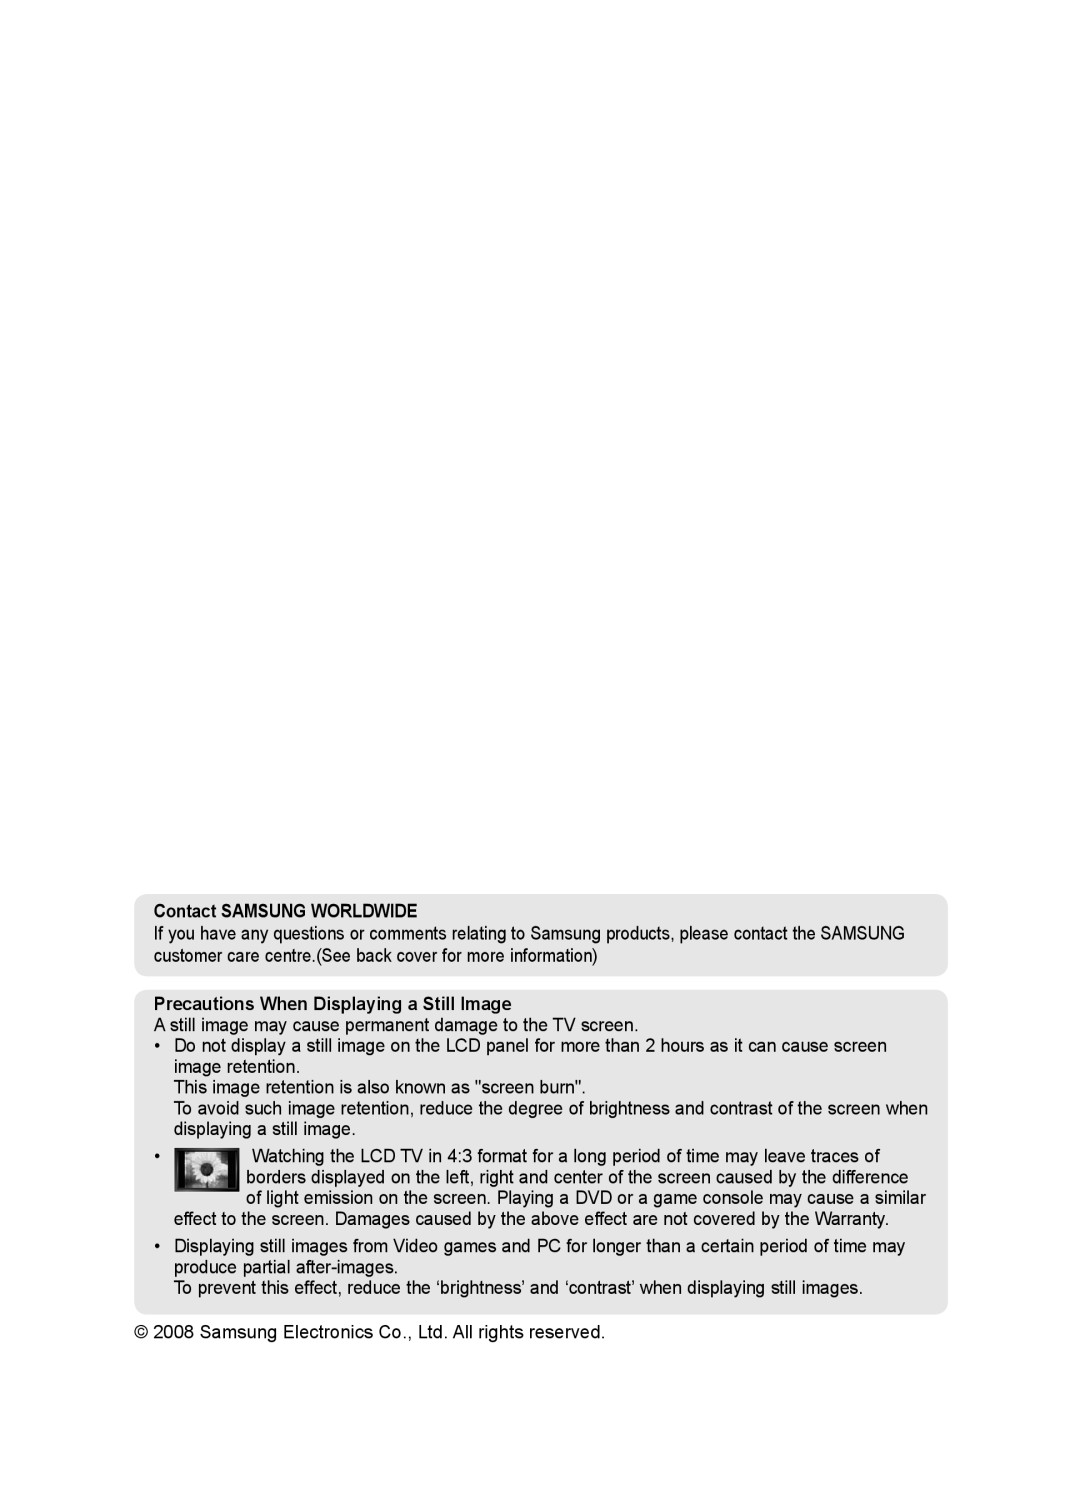 Samsung LE22A455C1D user manual Contact Samsung Worldwide, Precautions When Displaying a Still Image 